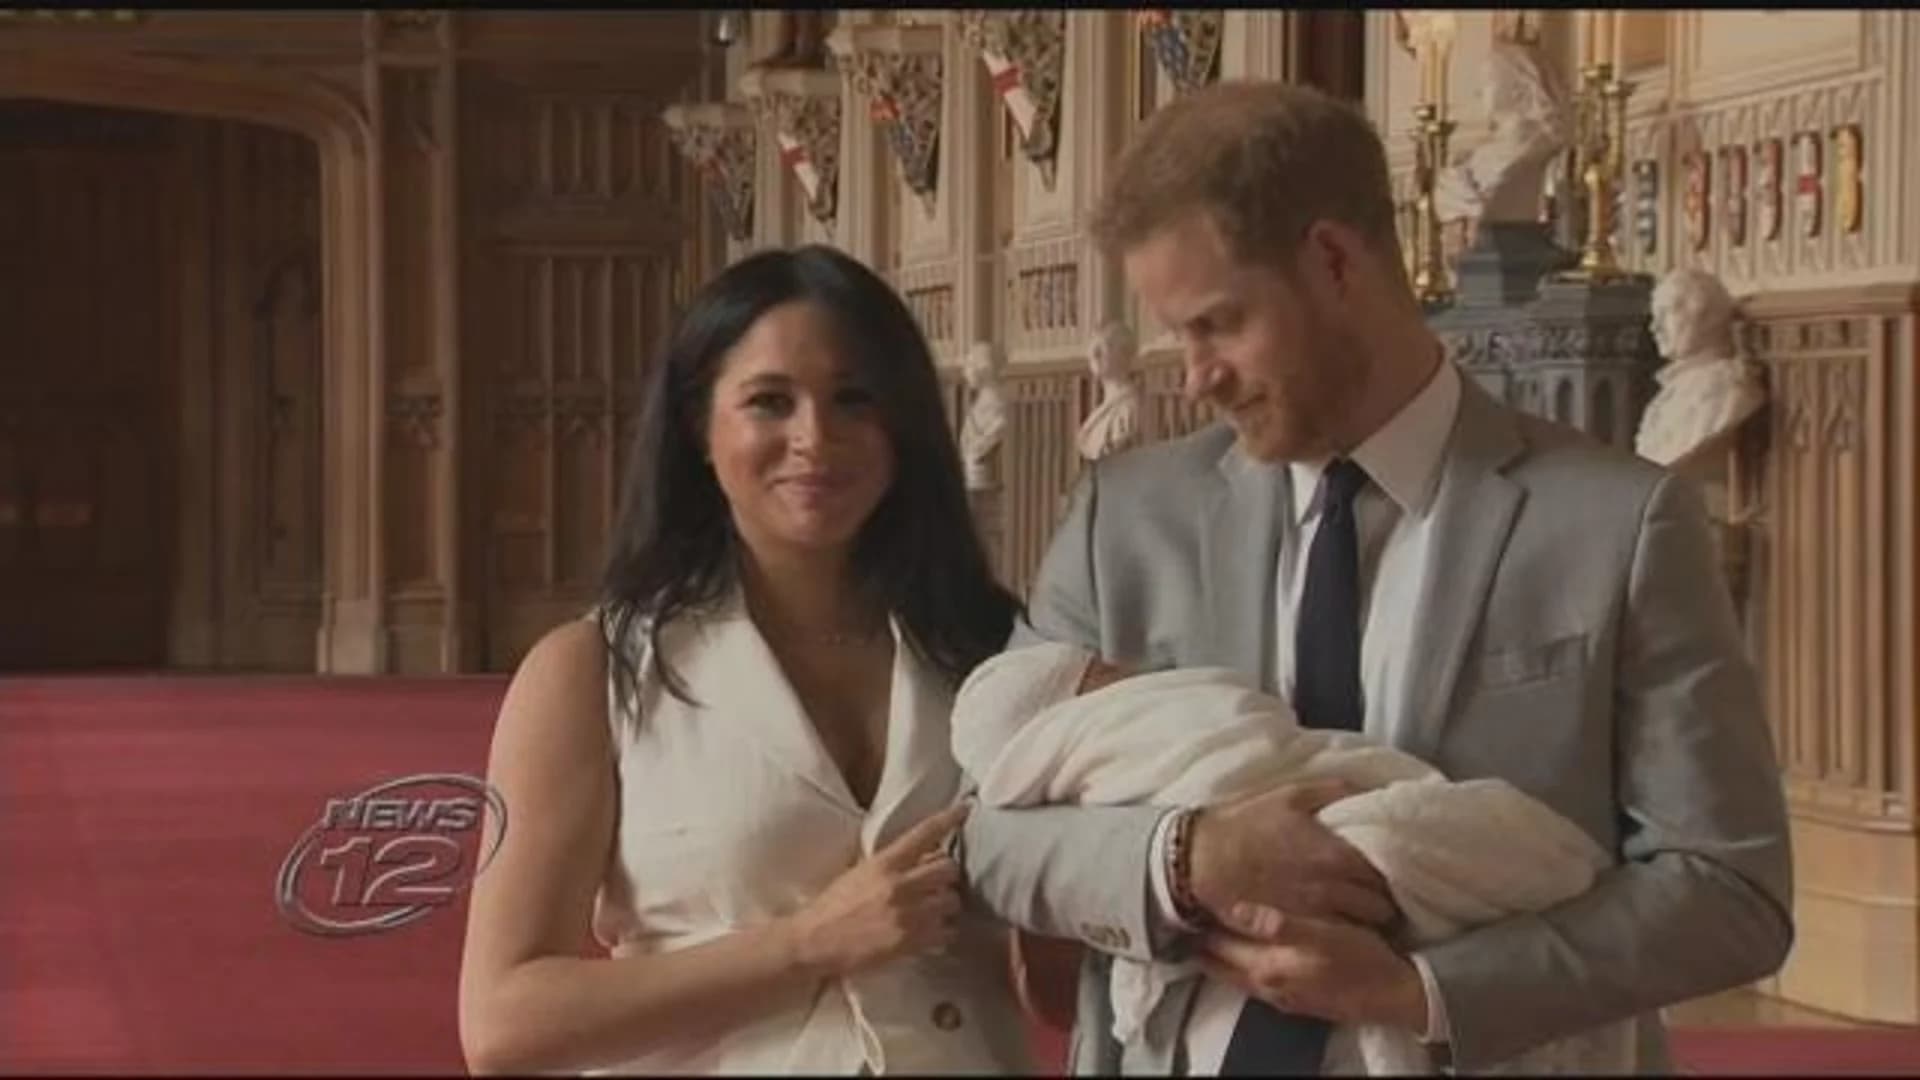 Meghan, Harry name baby son Archie Harrison